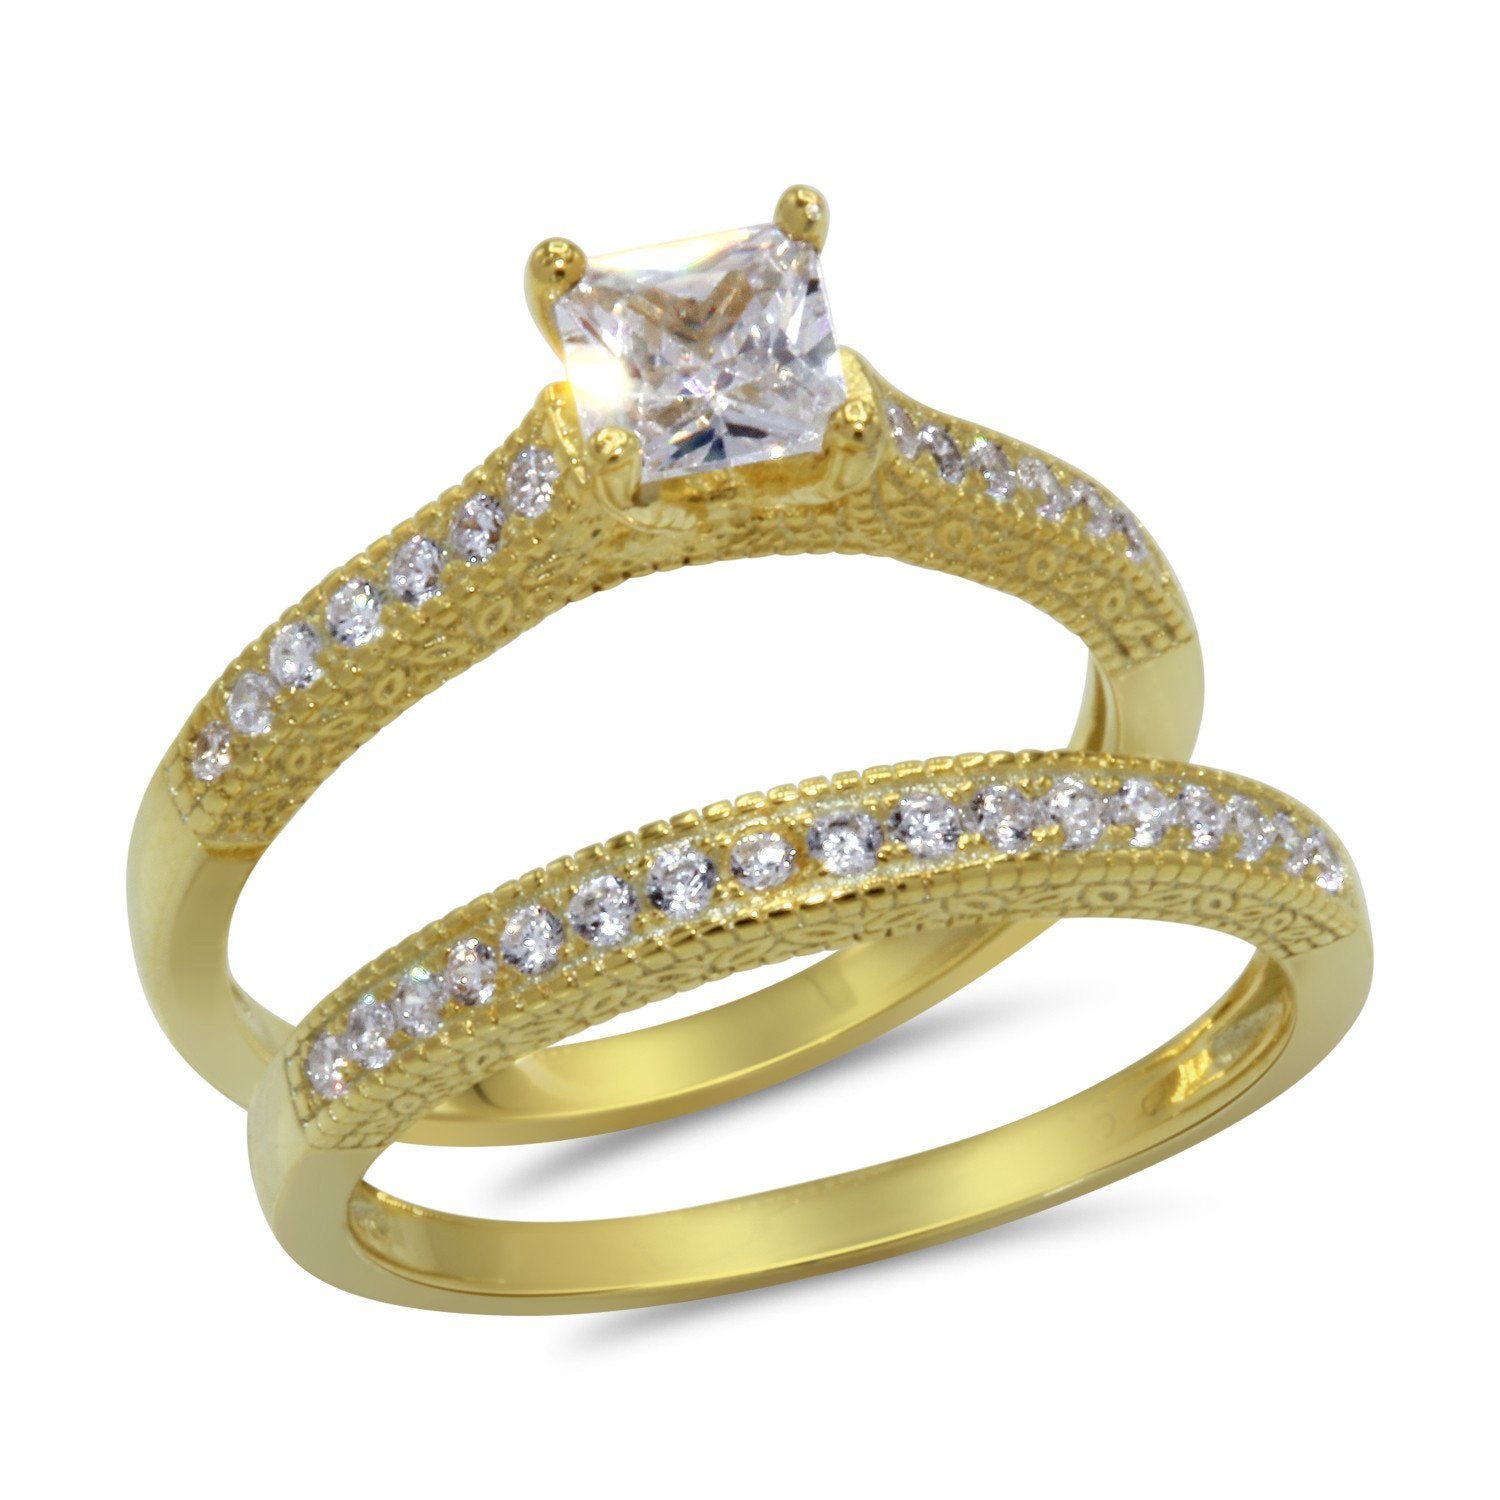 Gold Plated Cubic Zirconia Engaement Ring Set